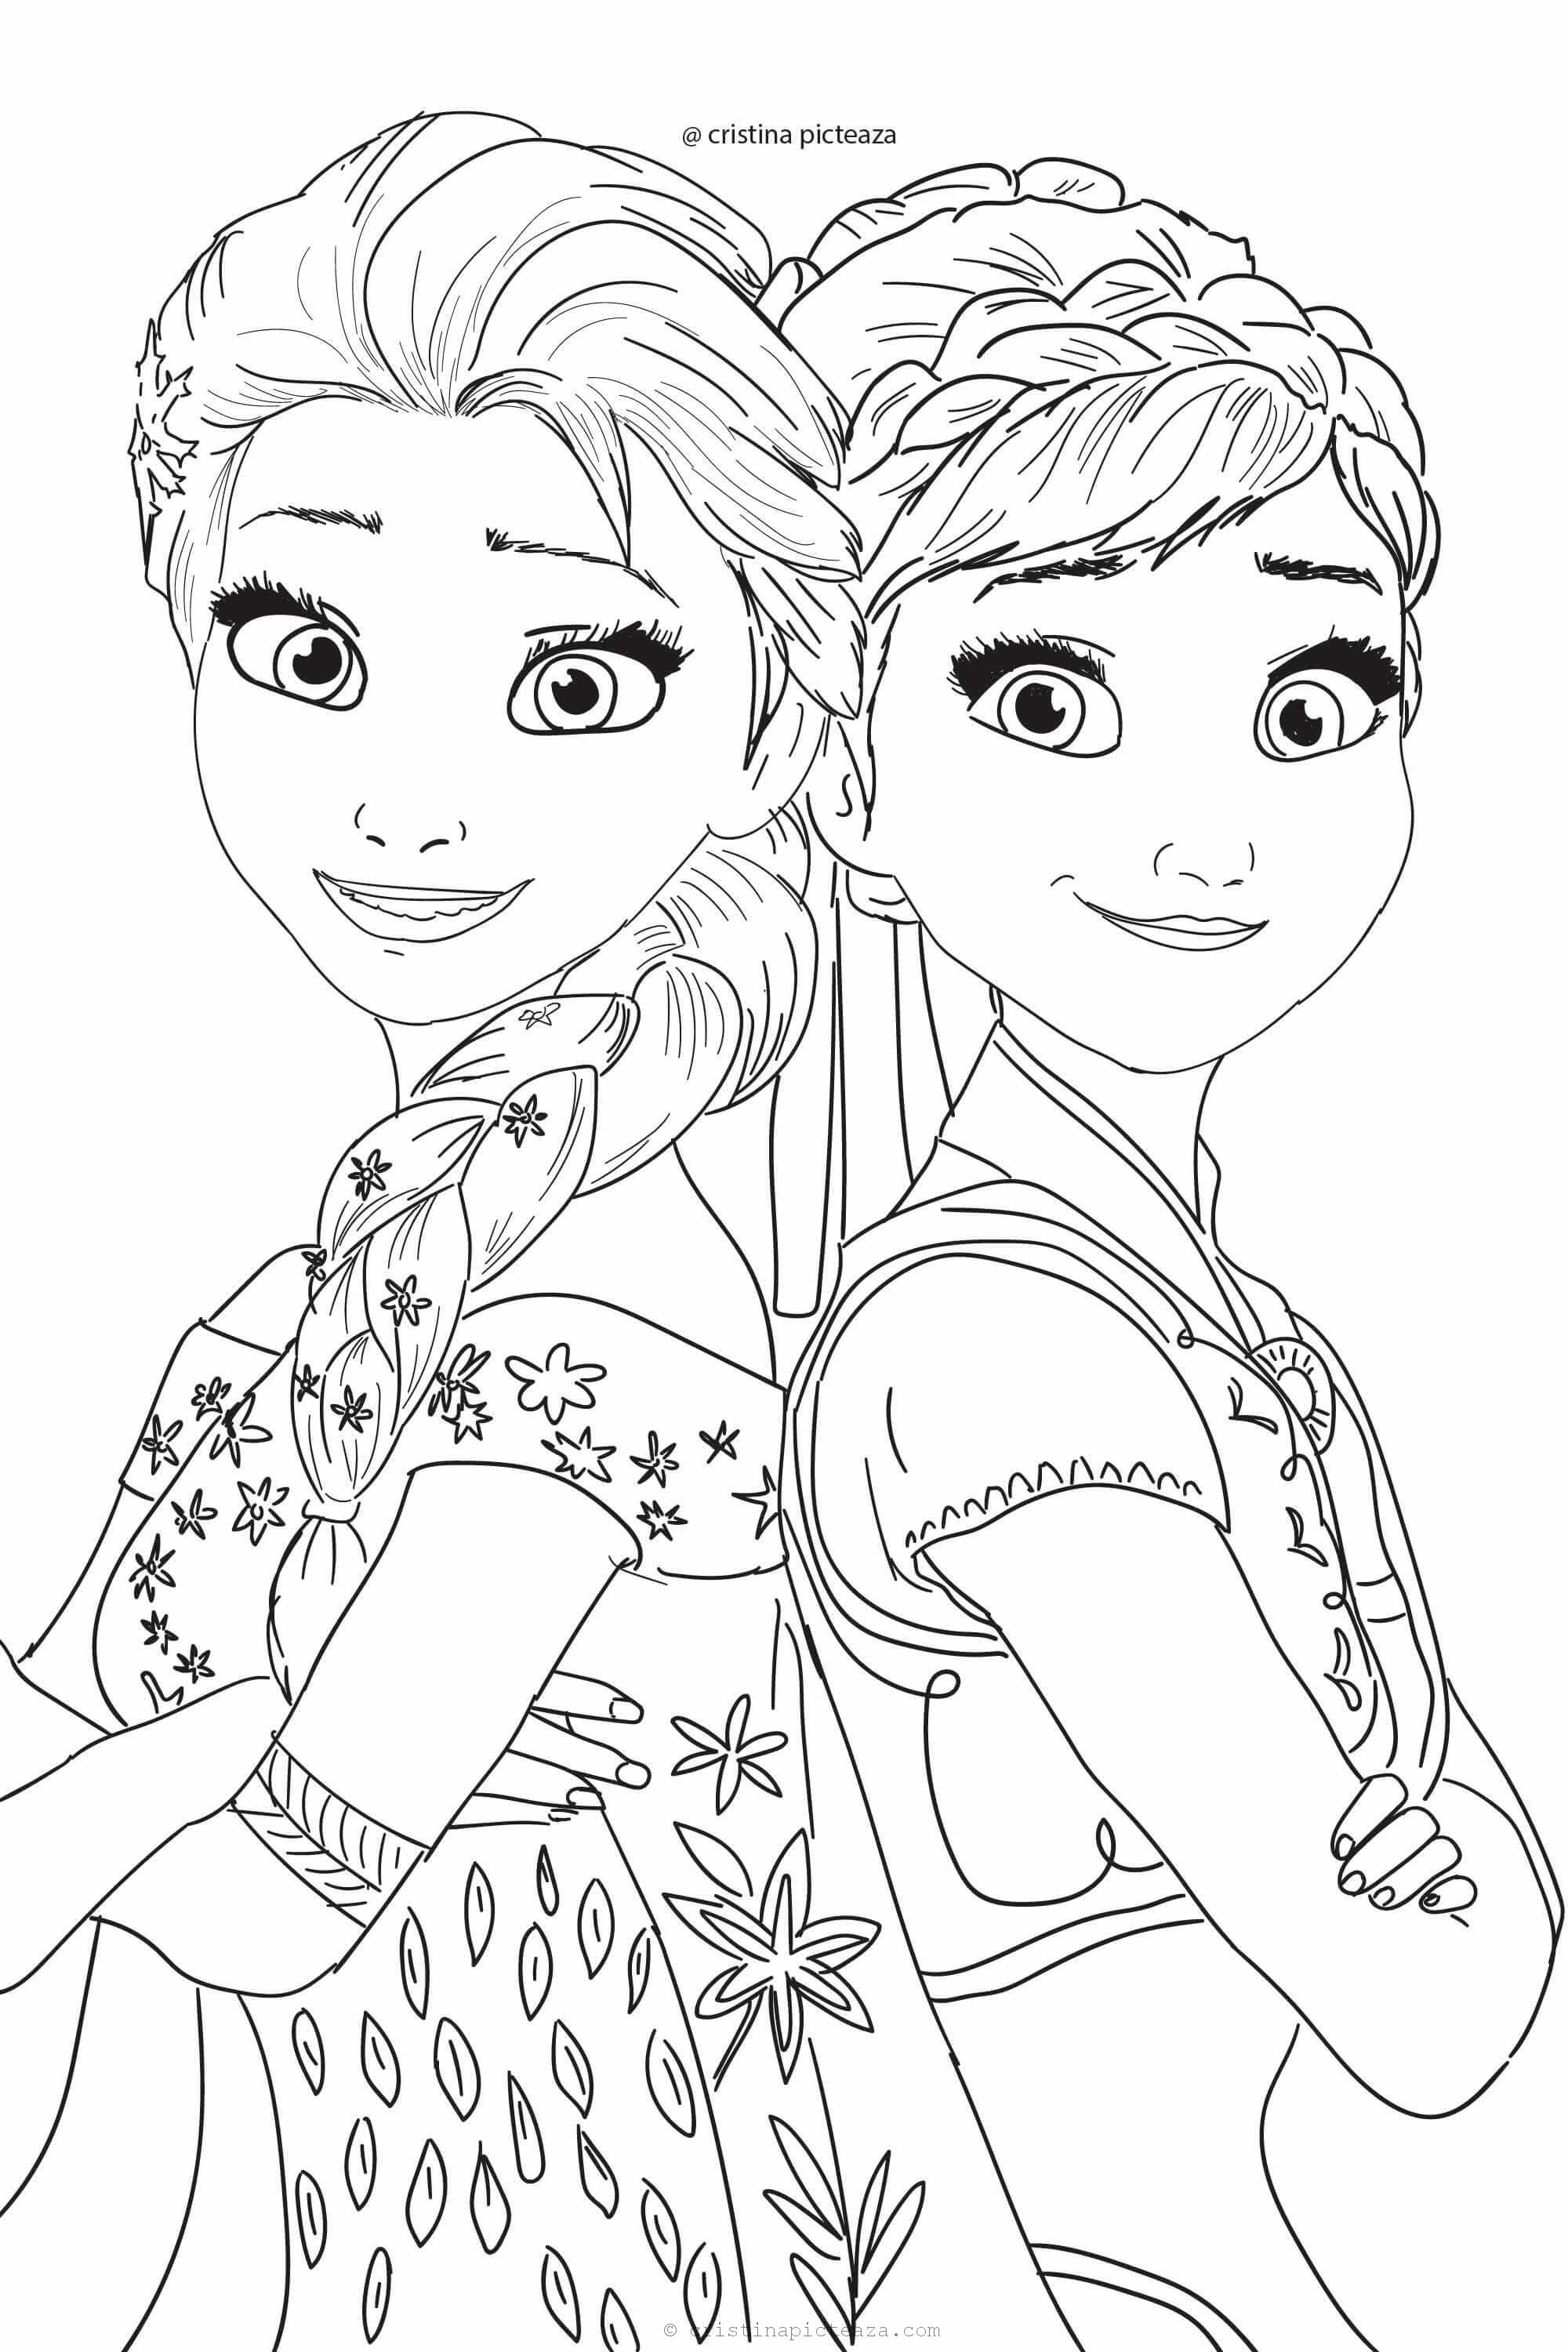 Frozen 2 Coloring Pages – Elsa and Anna coloring